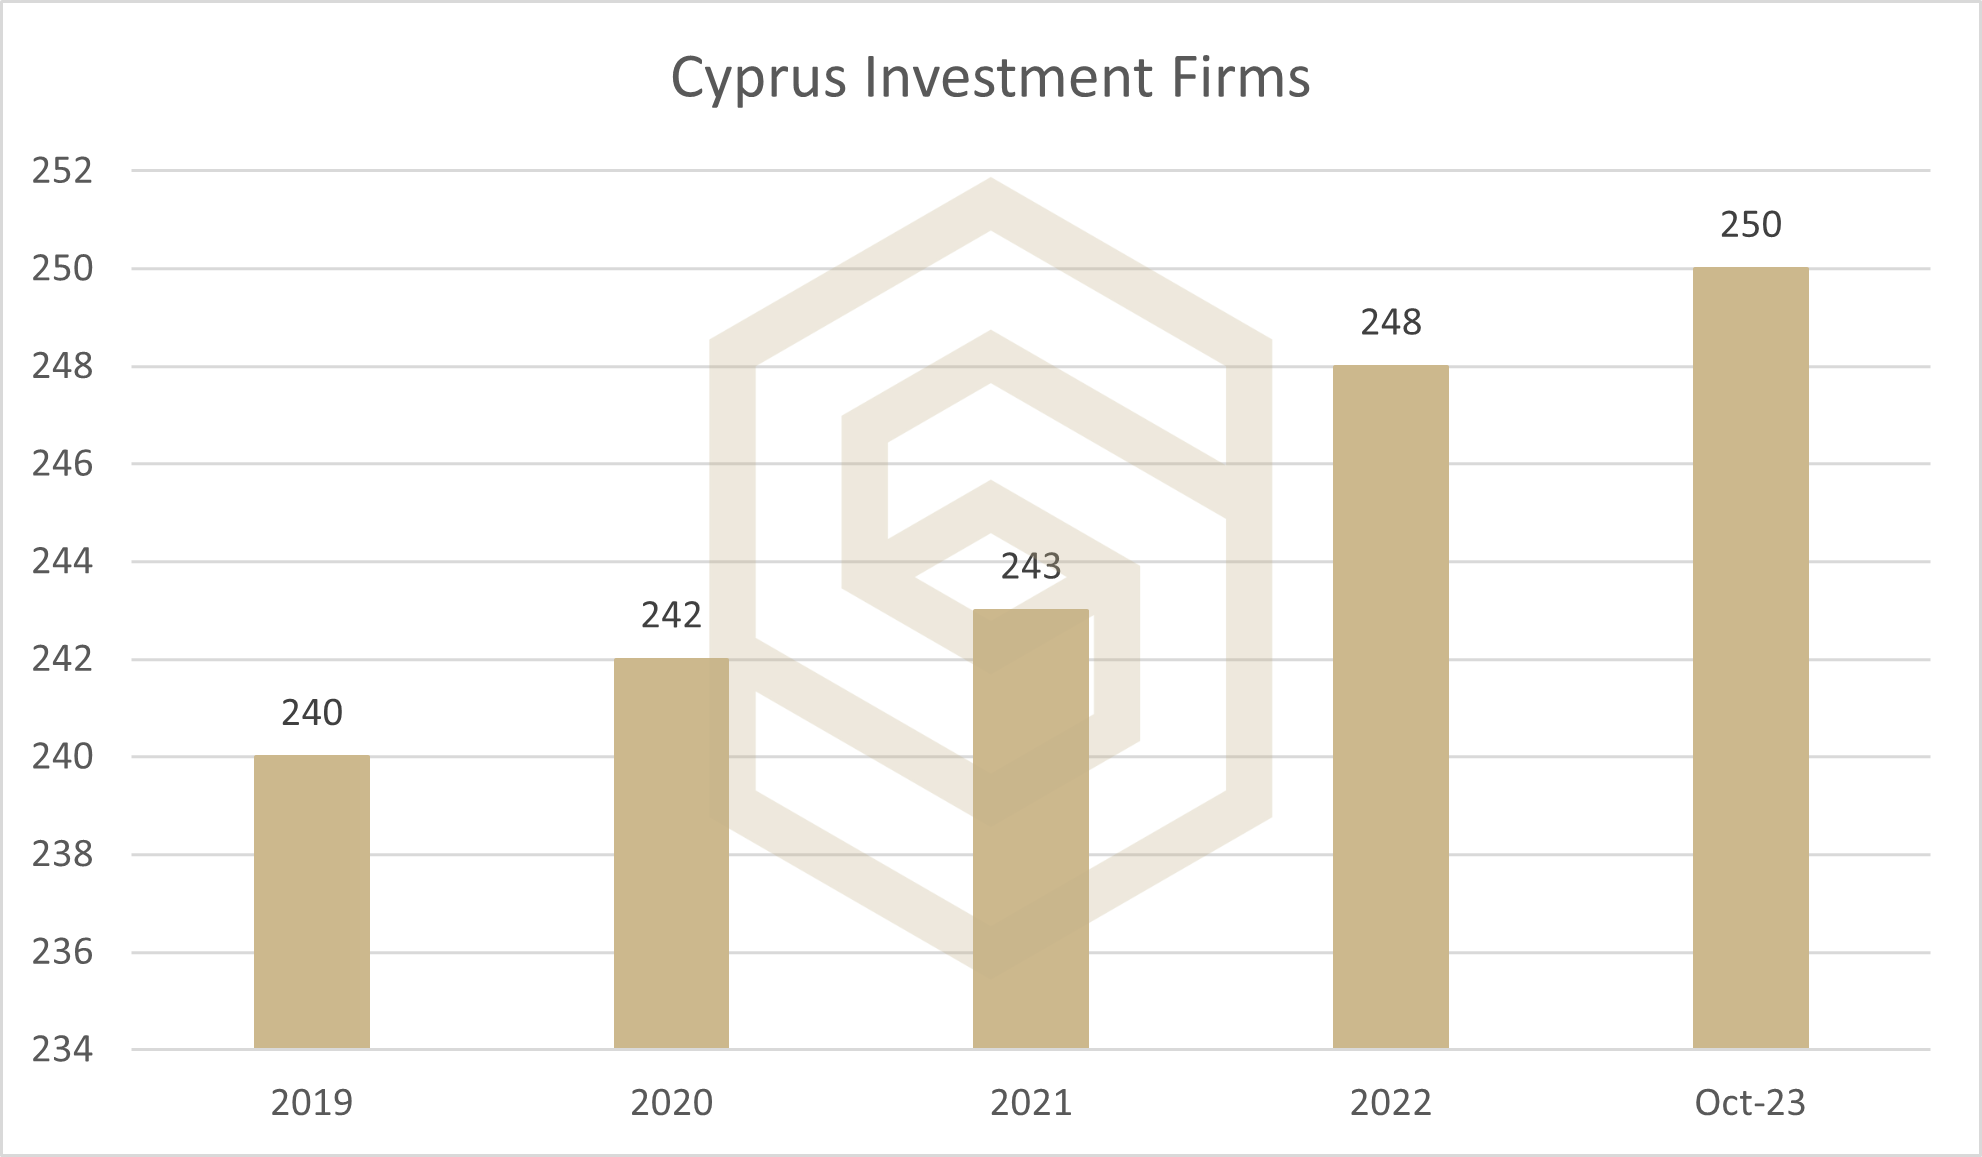 Cyprus Investment Firms